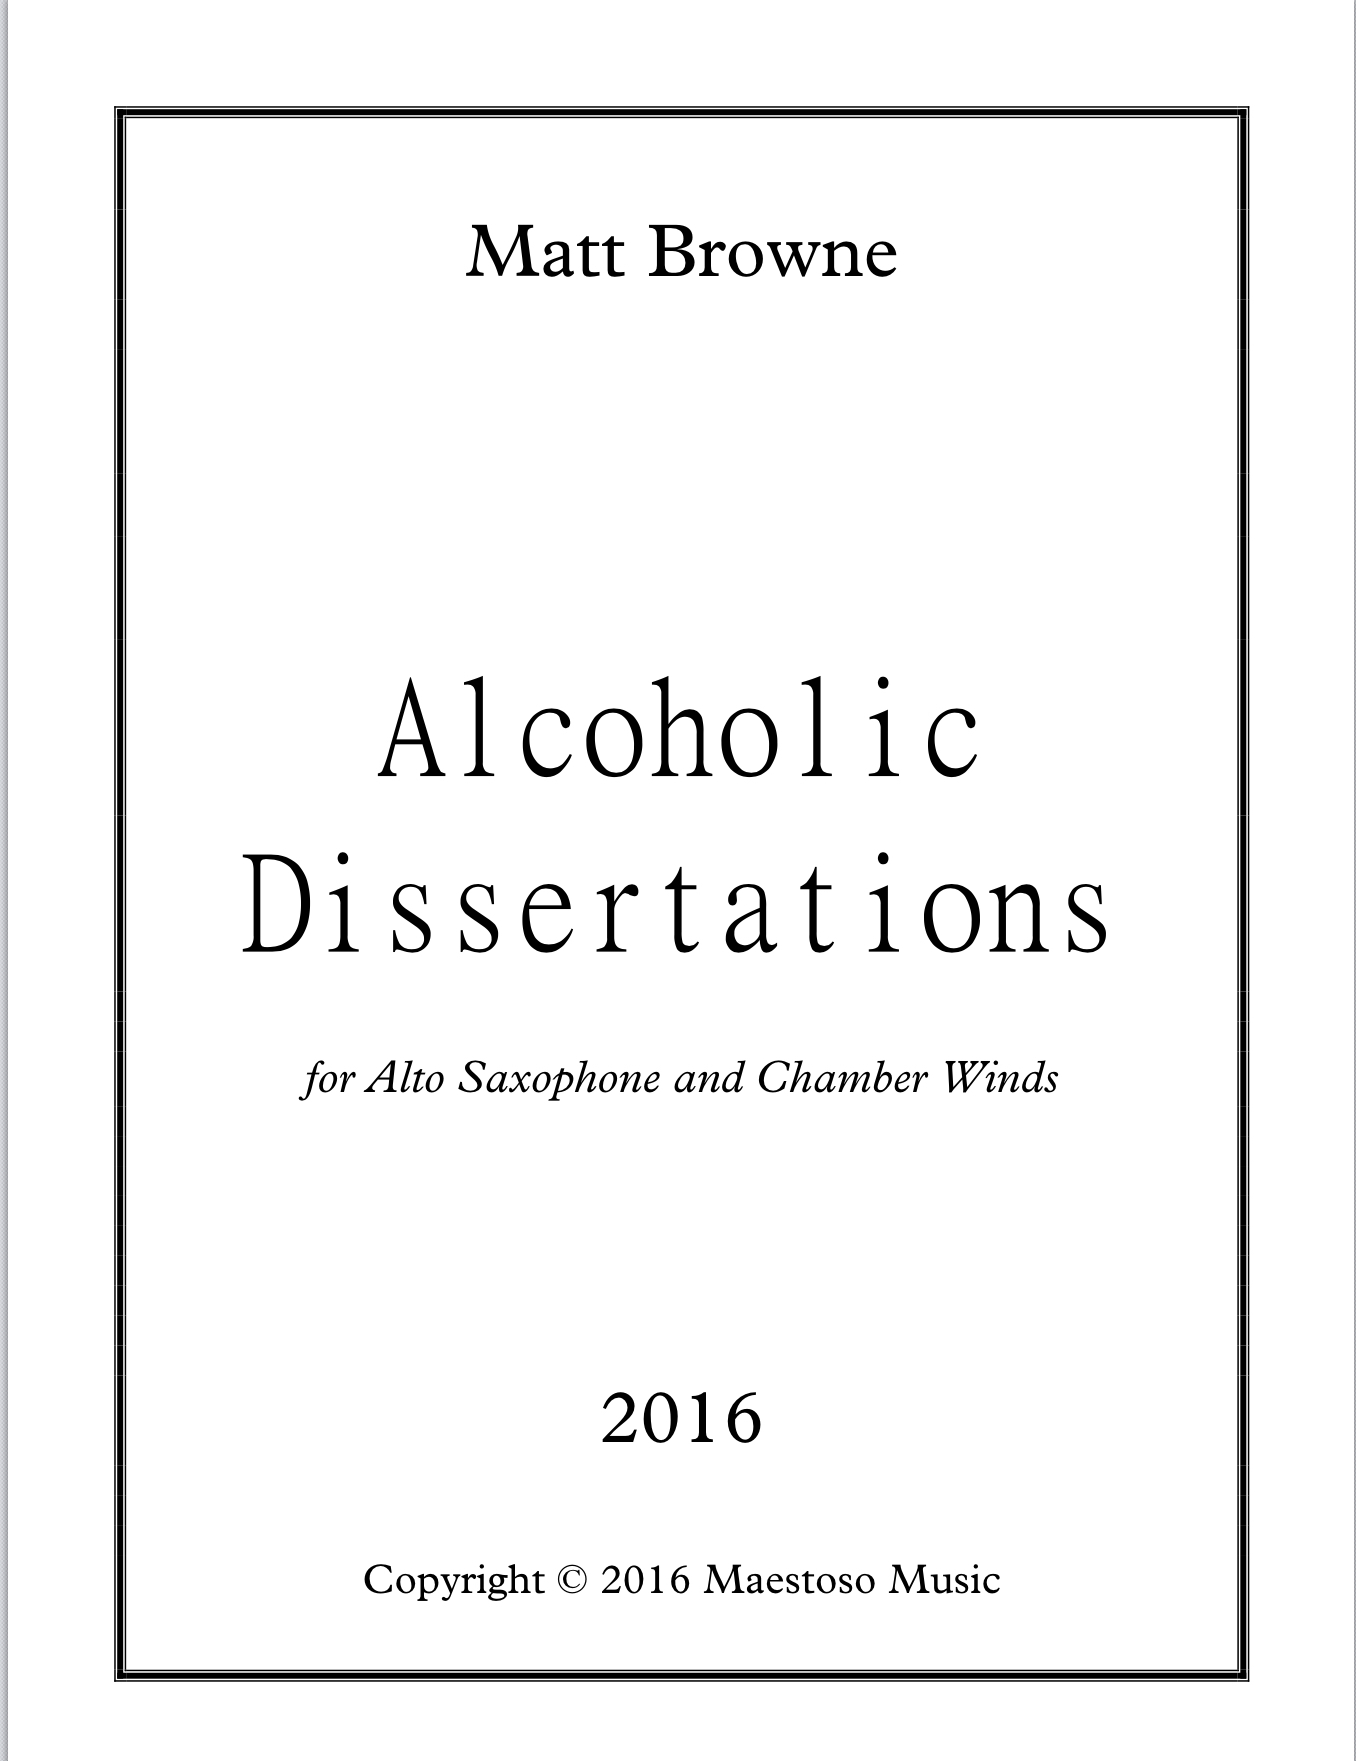 Alcoholic Dissertations  by Matthew Browne 